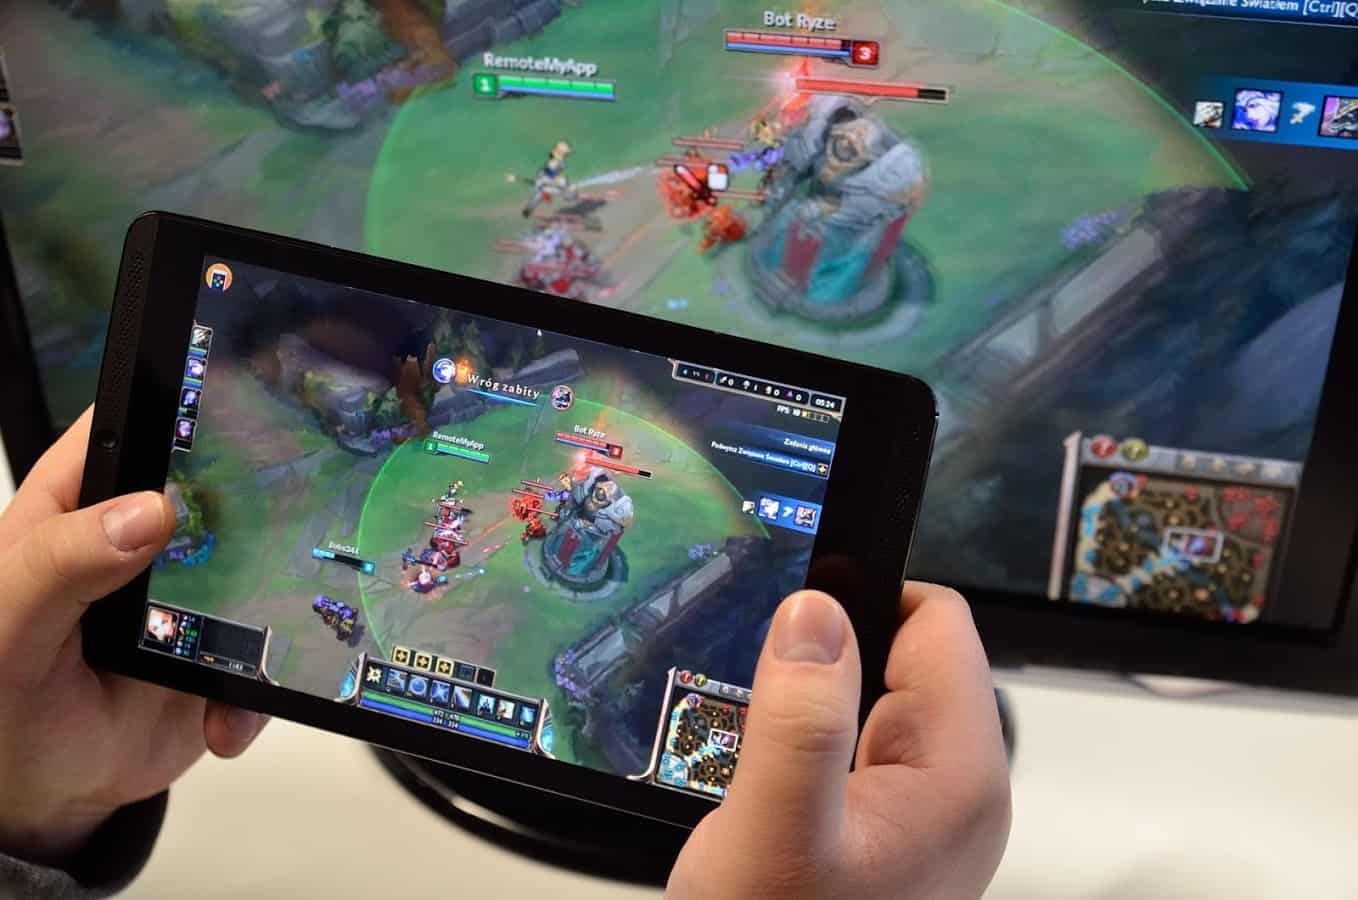 How to play PC Games on Android Phone